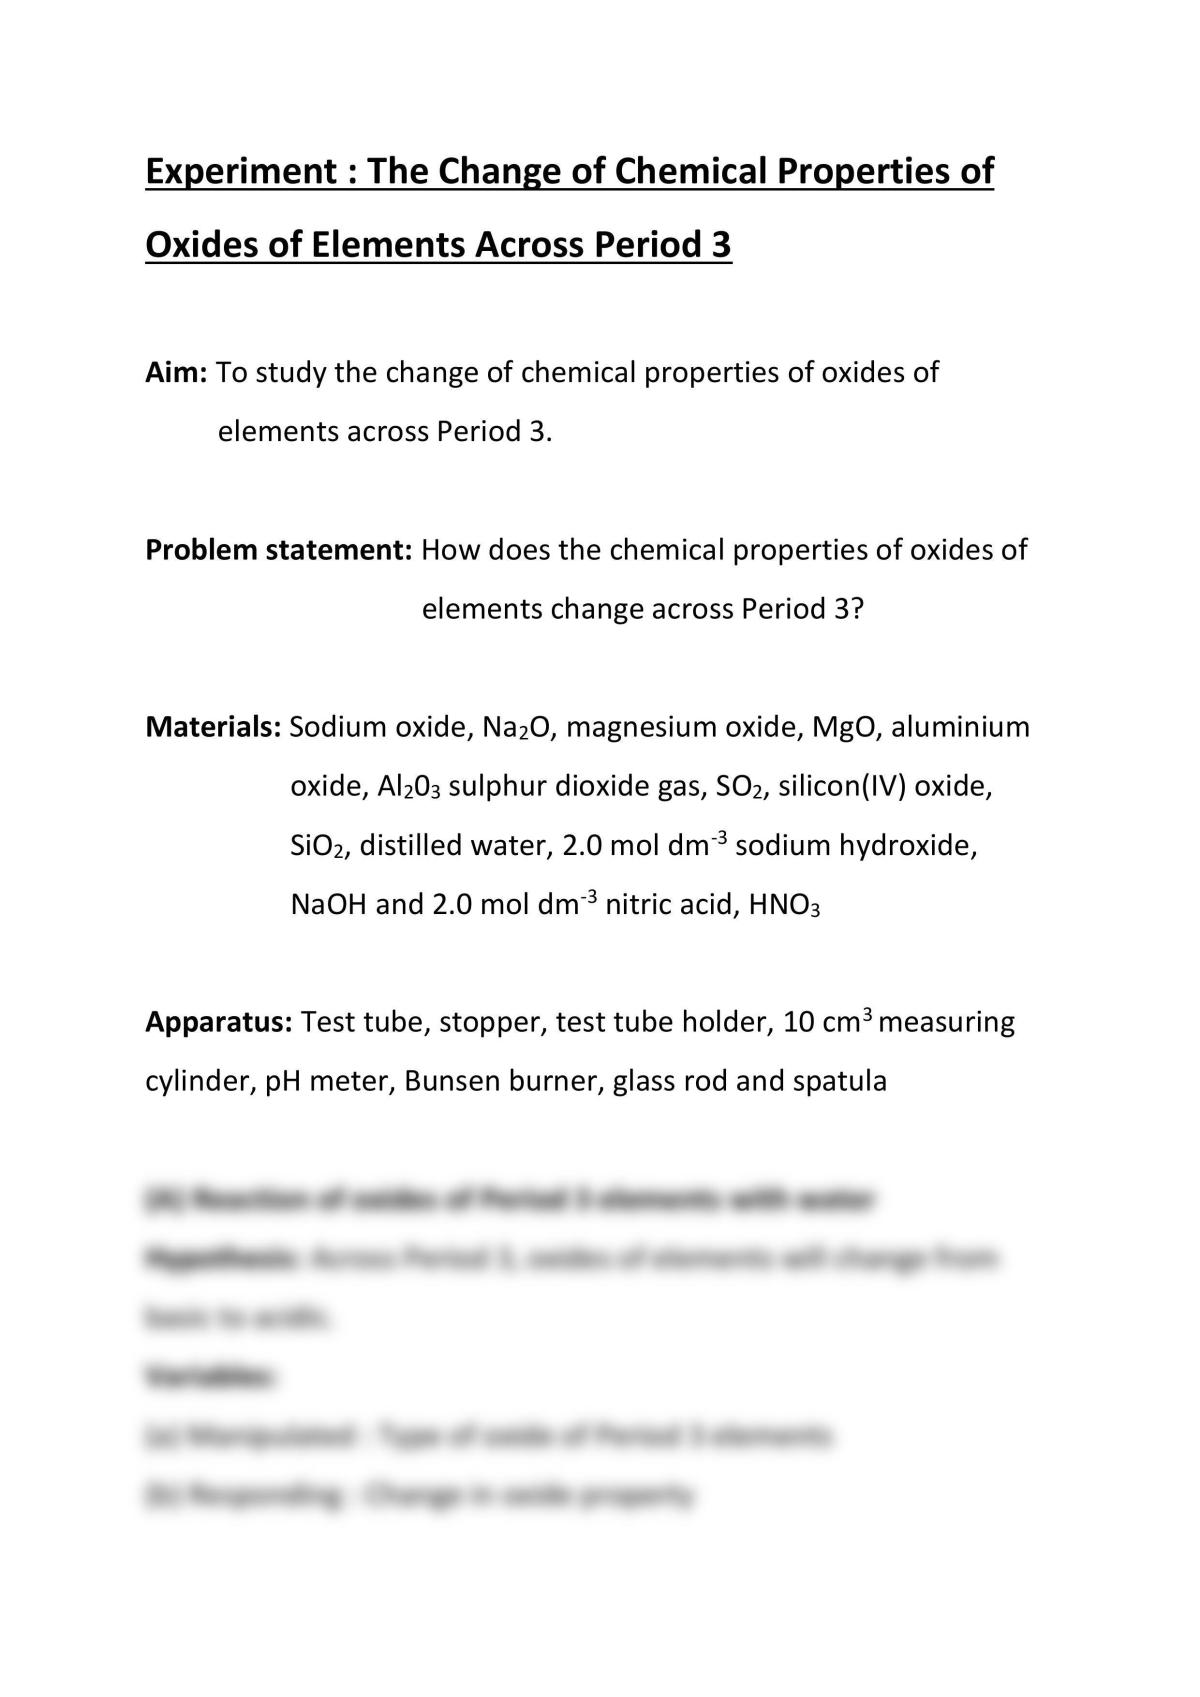 Experiment: The Change of Chemical Properties of Oxides of Elements Across Period 3 - Page 1